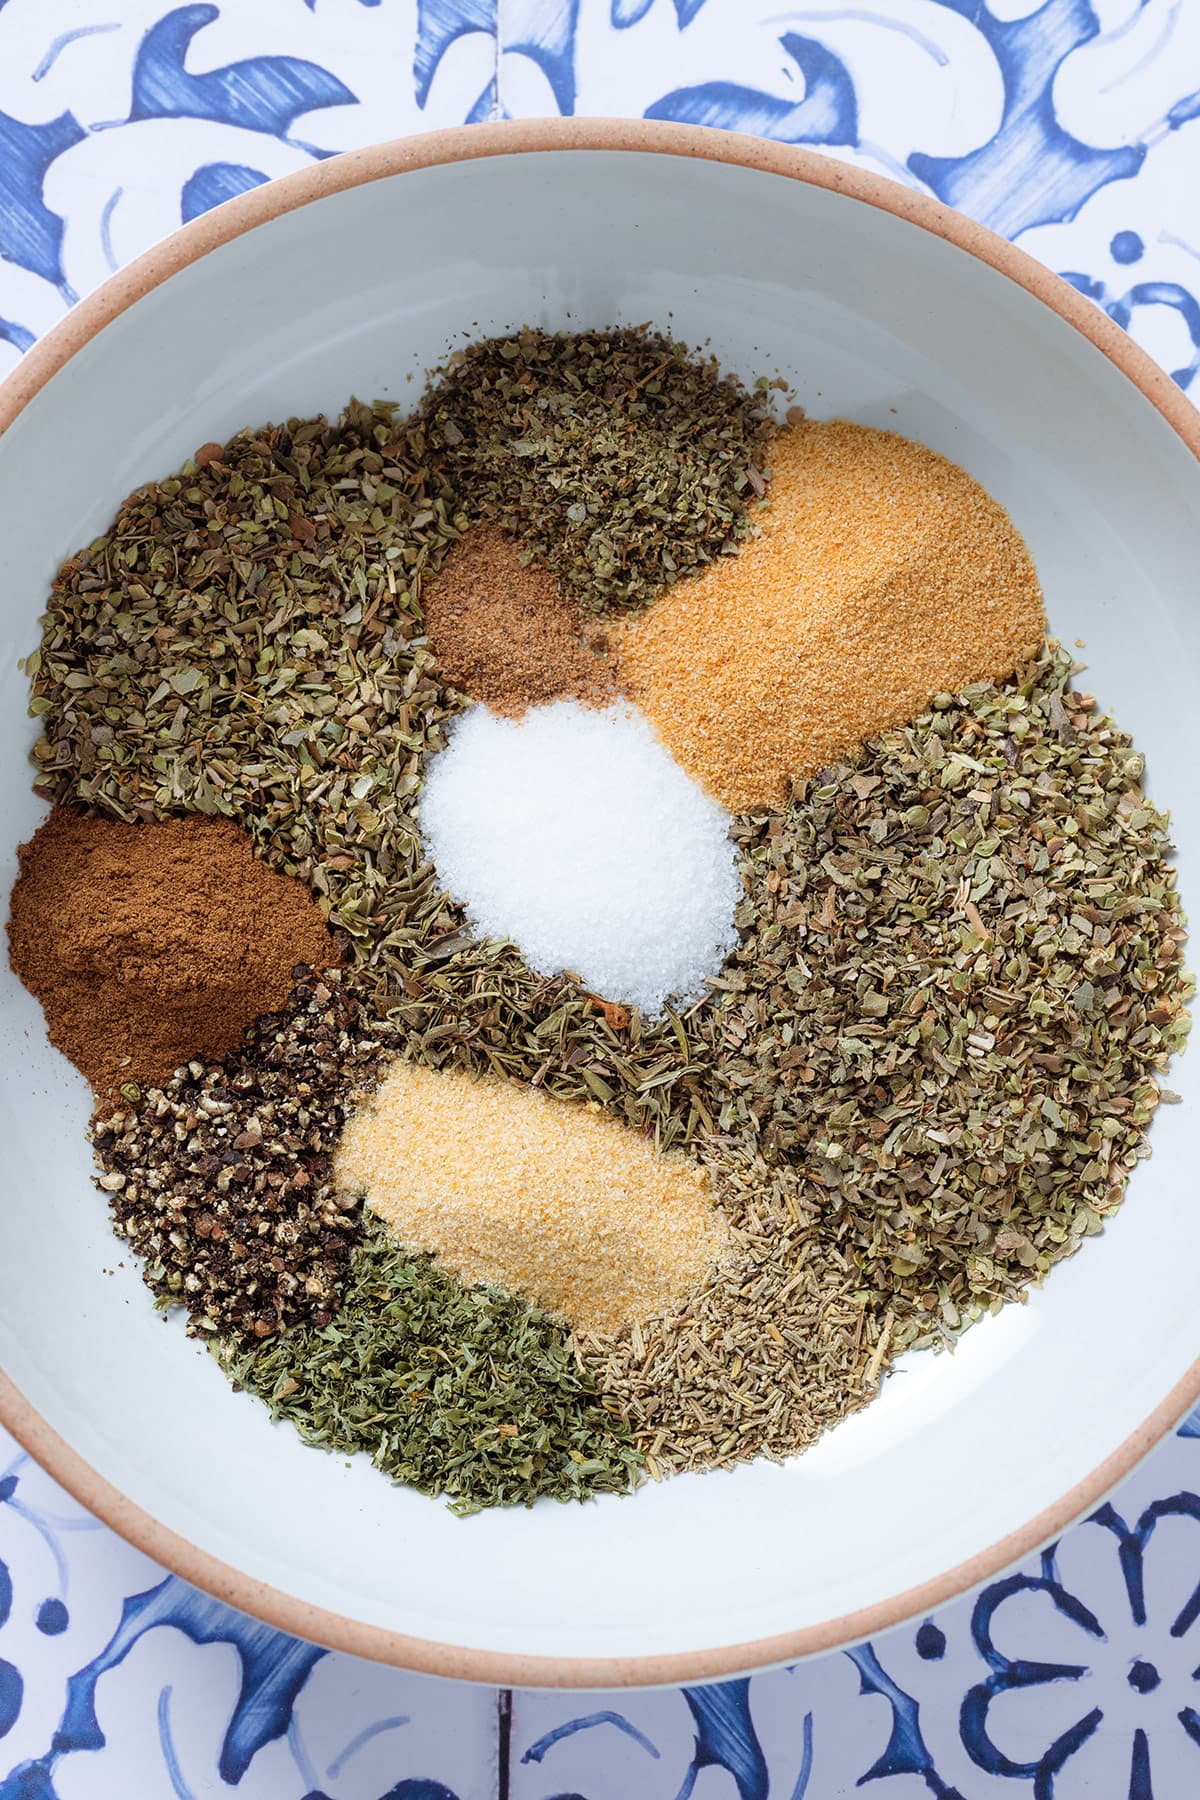 Dried herbs and spices neatly laid out on a white bowl on a blue background.